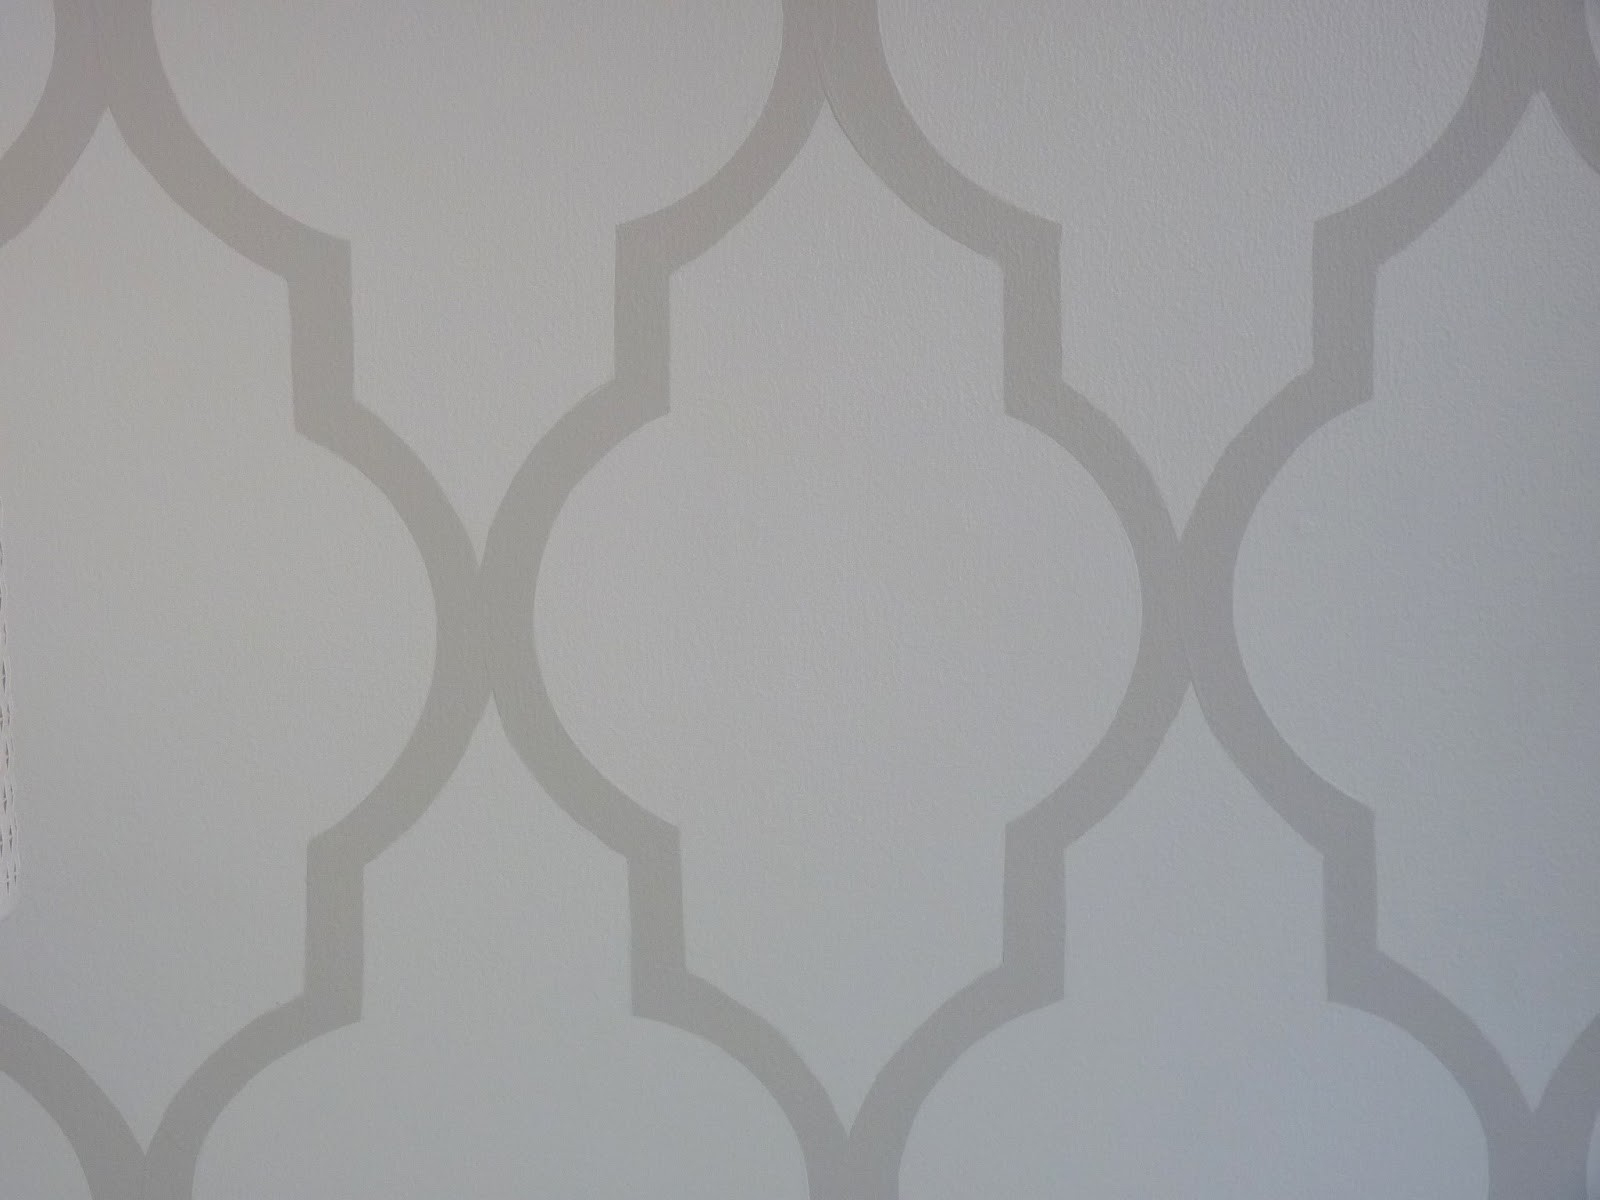 Lovely Free Printable Moroccan Wall Stencils | Www.pantry-Magic - Free Printable Moroccan Wall Stencils